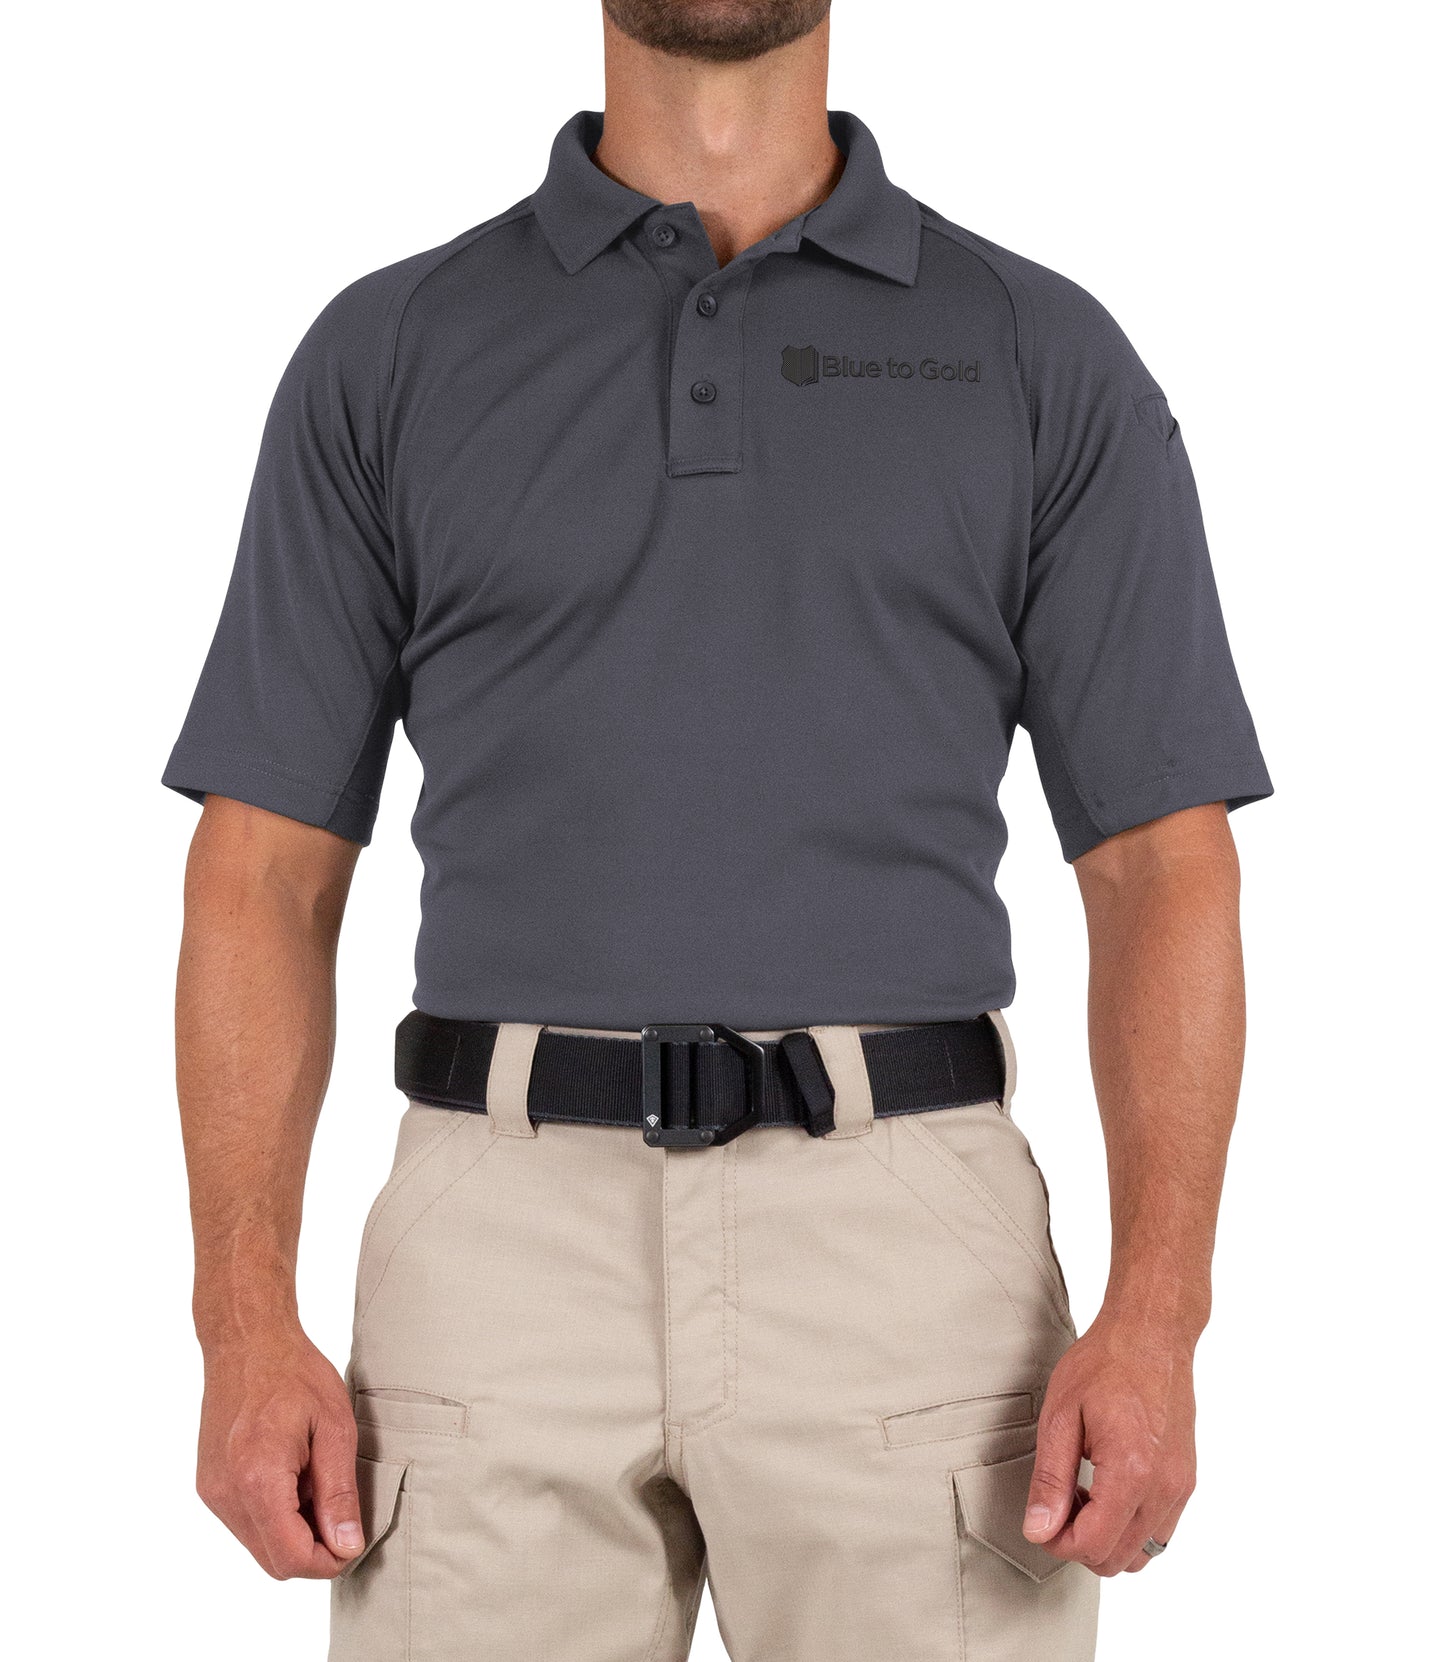 Blue to Gold Short Sleeve Performance Polo by First Tactical